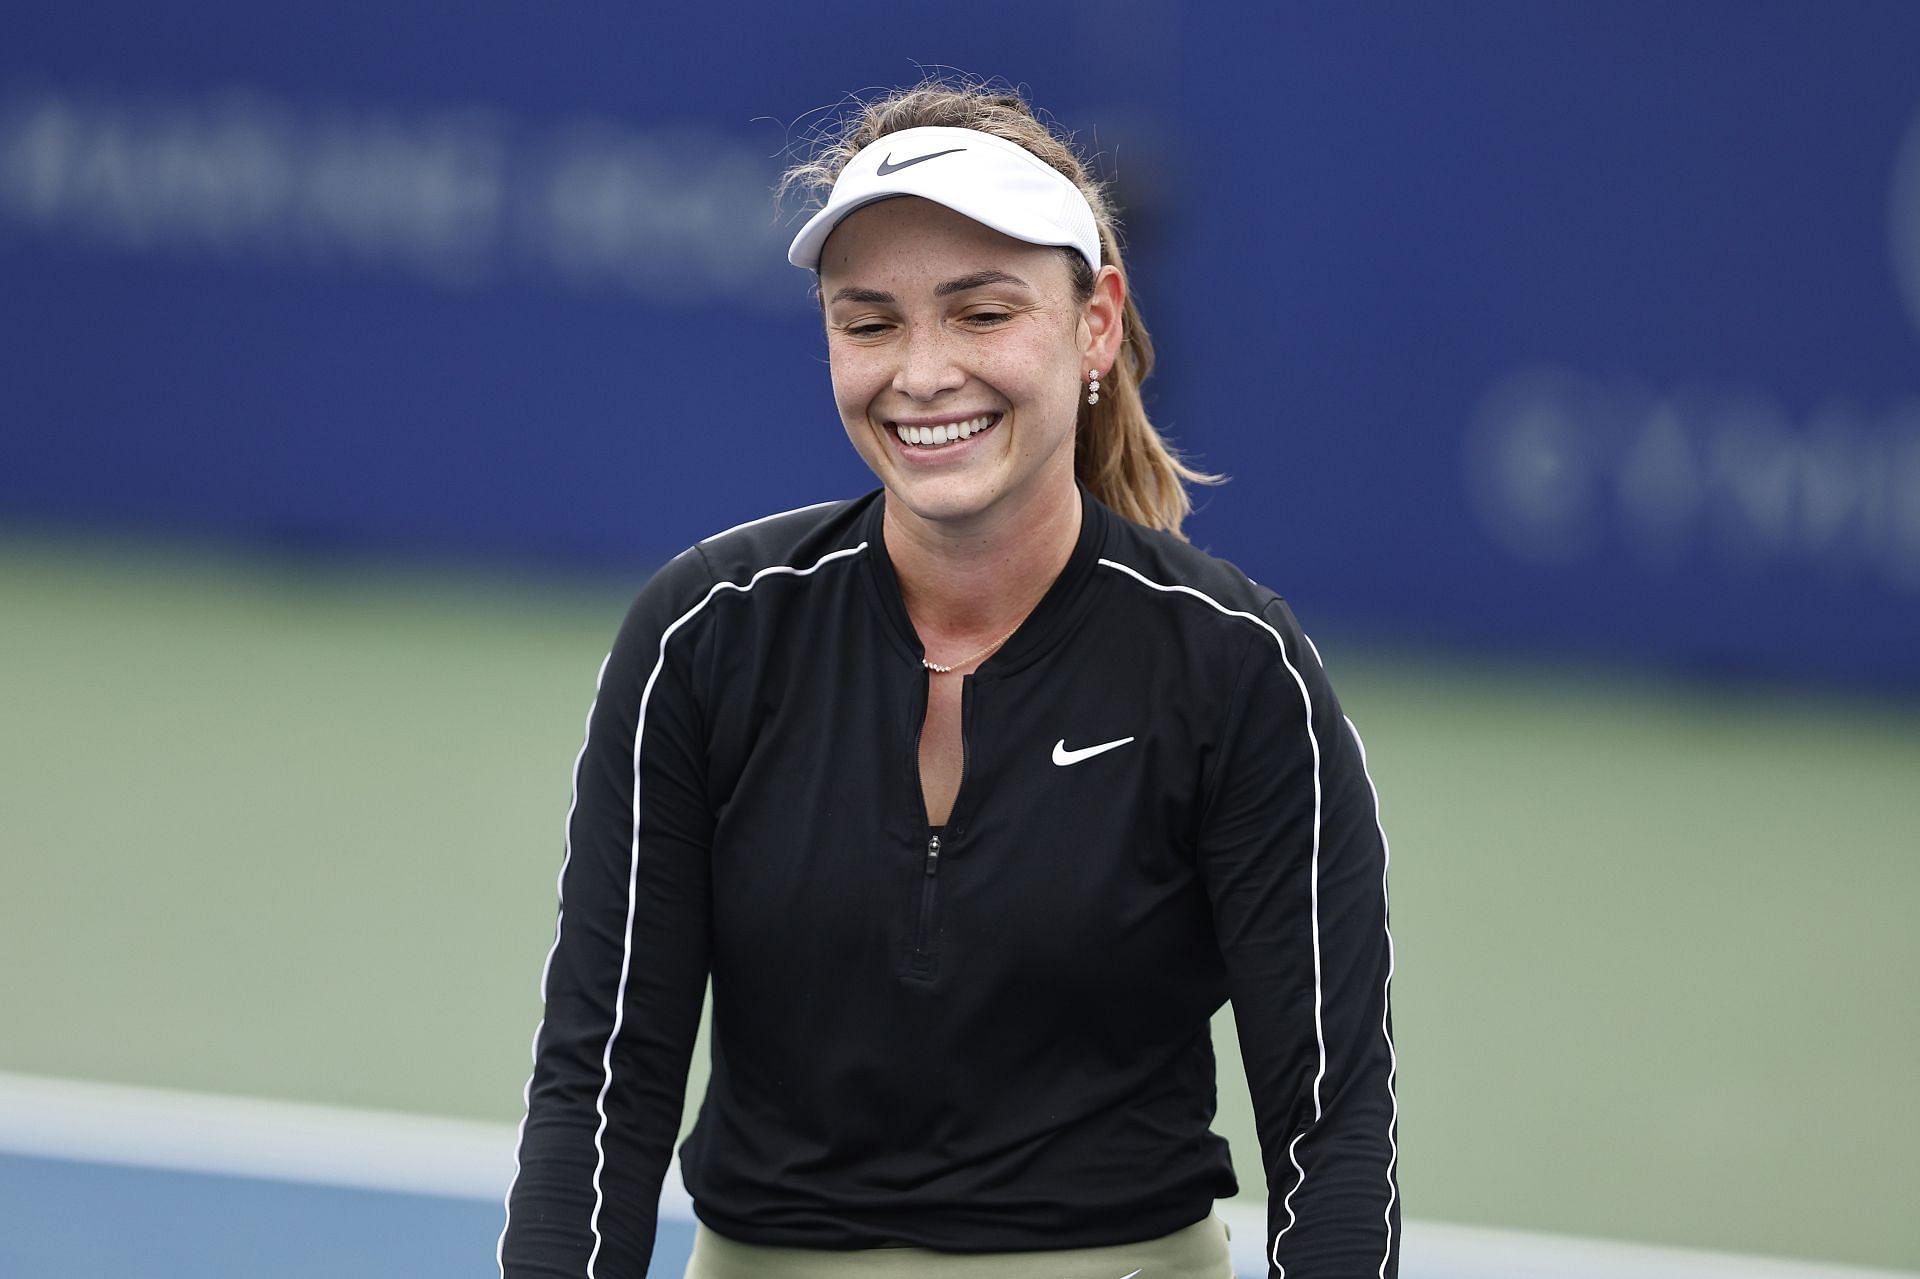 Donna Vekic at the 2022 San Diego Open.